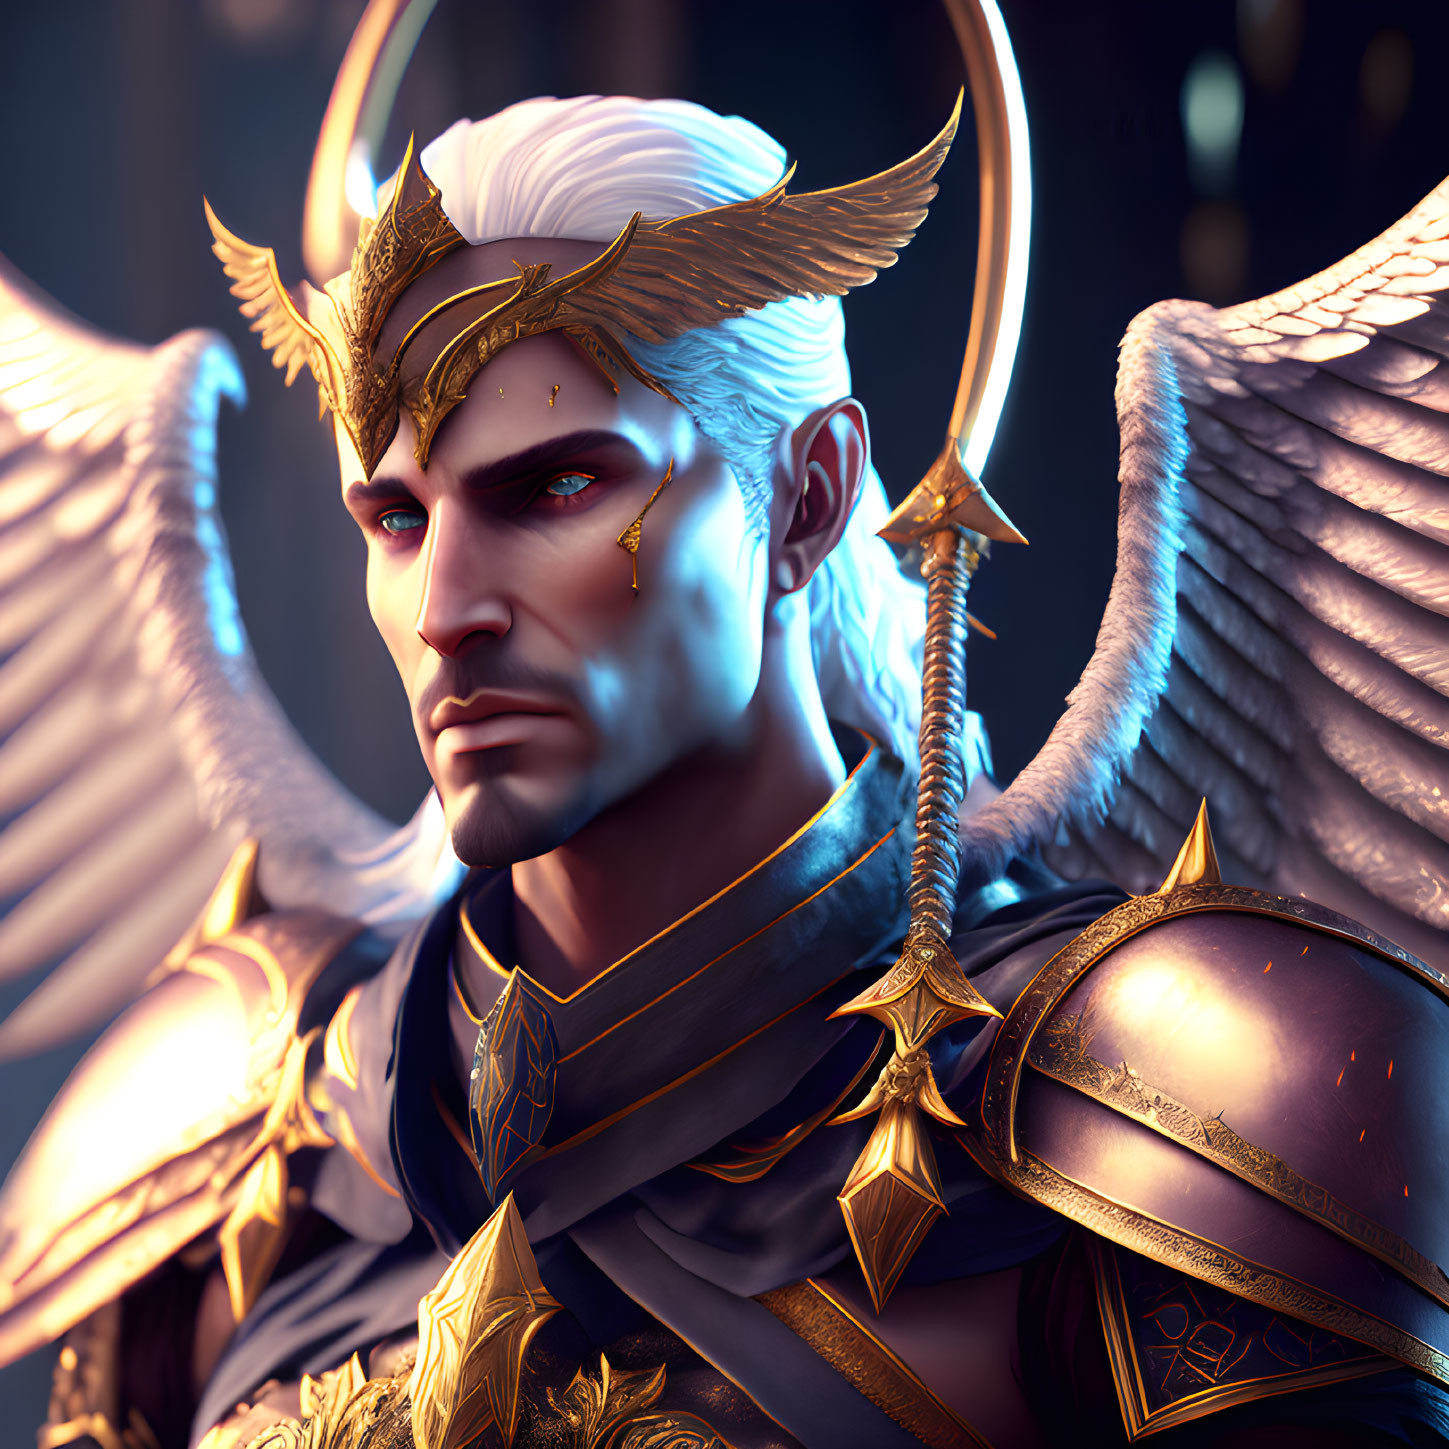 Digital art: Majestic male figure with golden winged helmet and celestial-themed armor